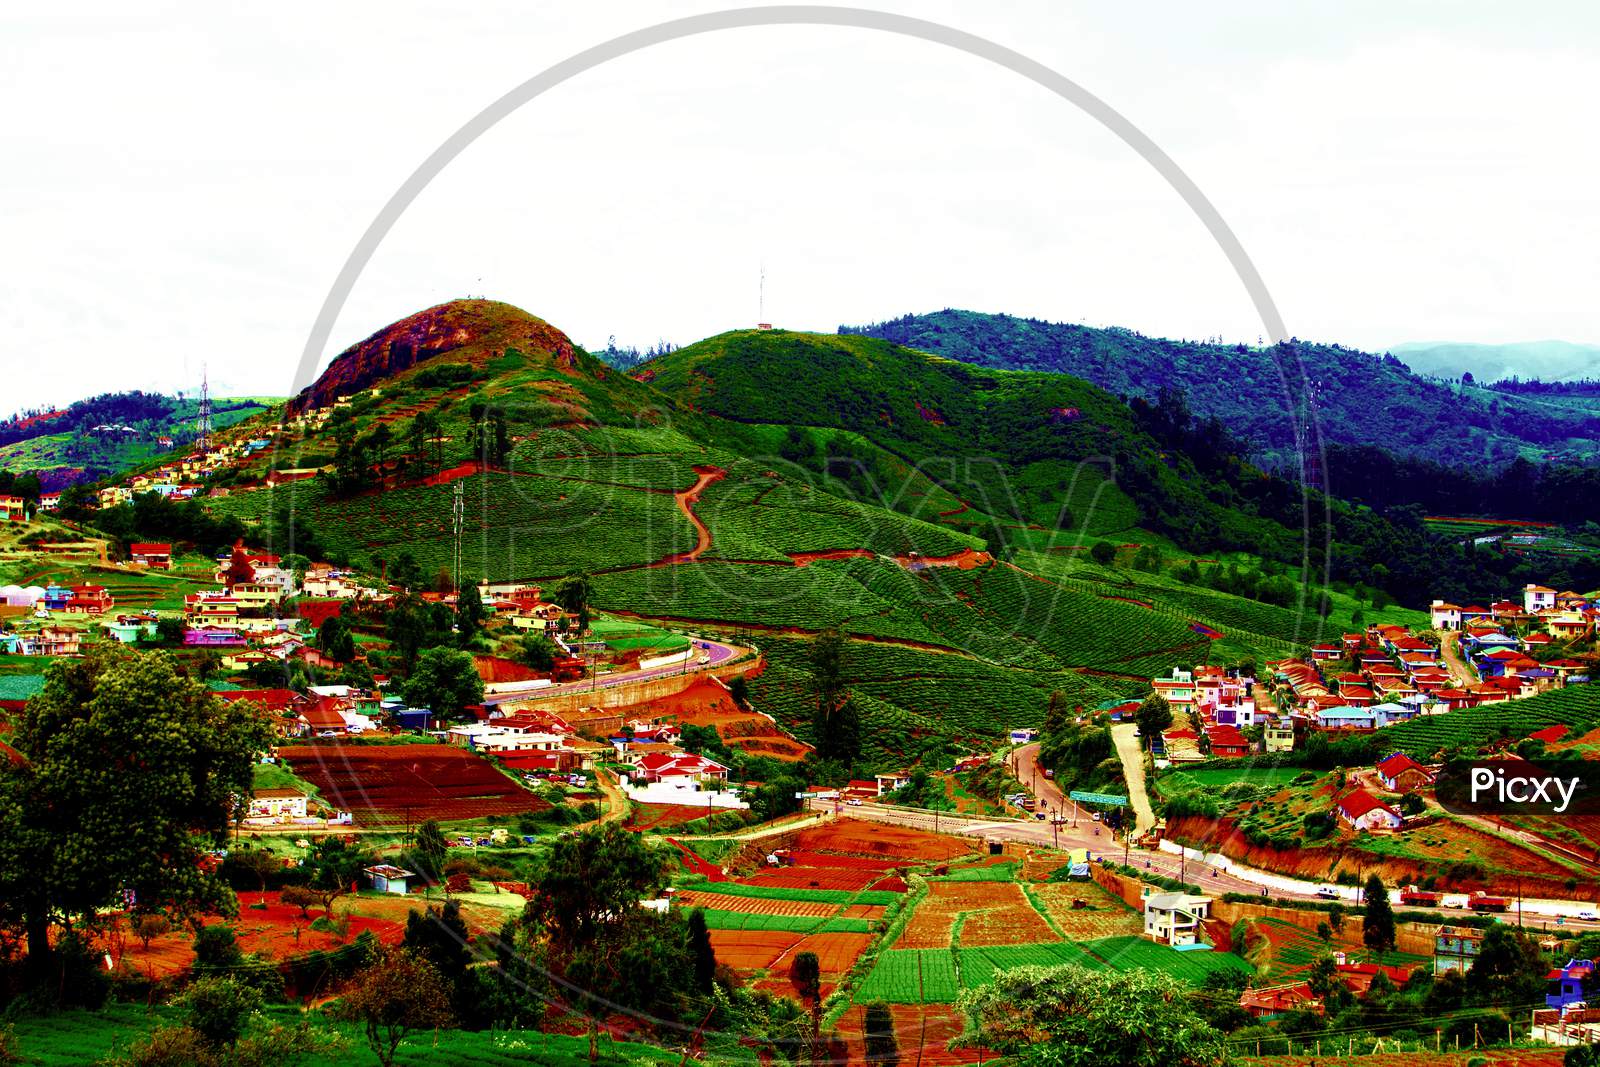 Landscape , mountain village with tea garden and green trees